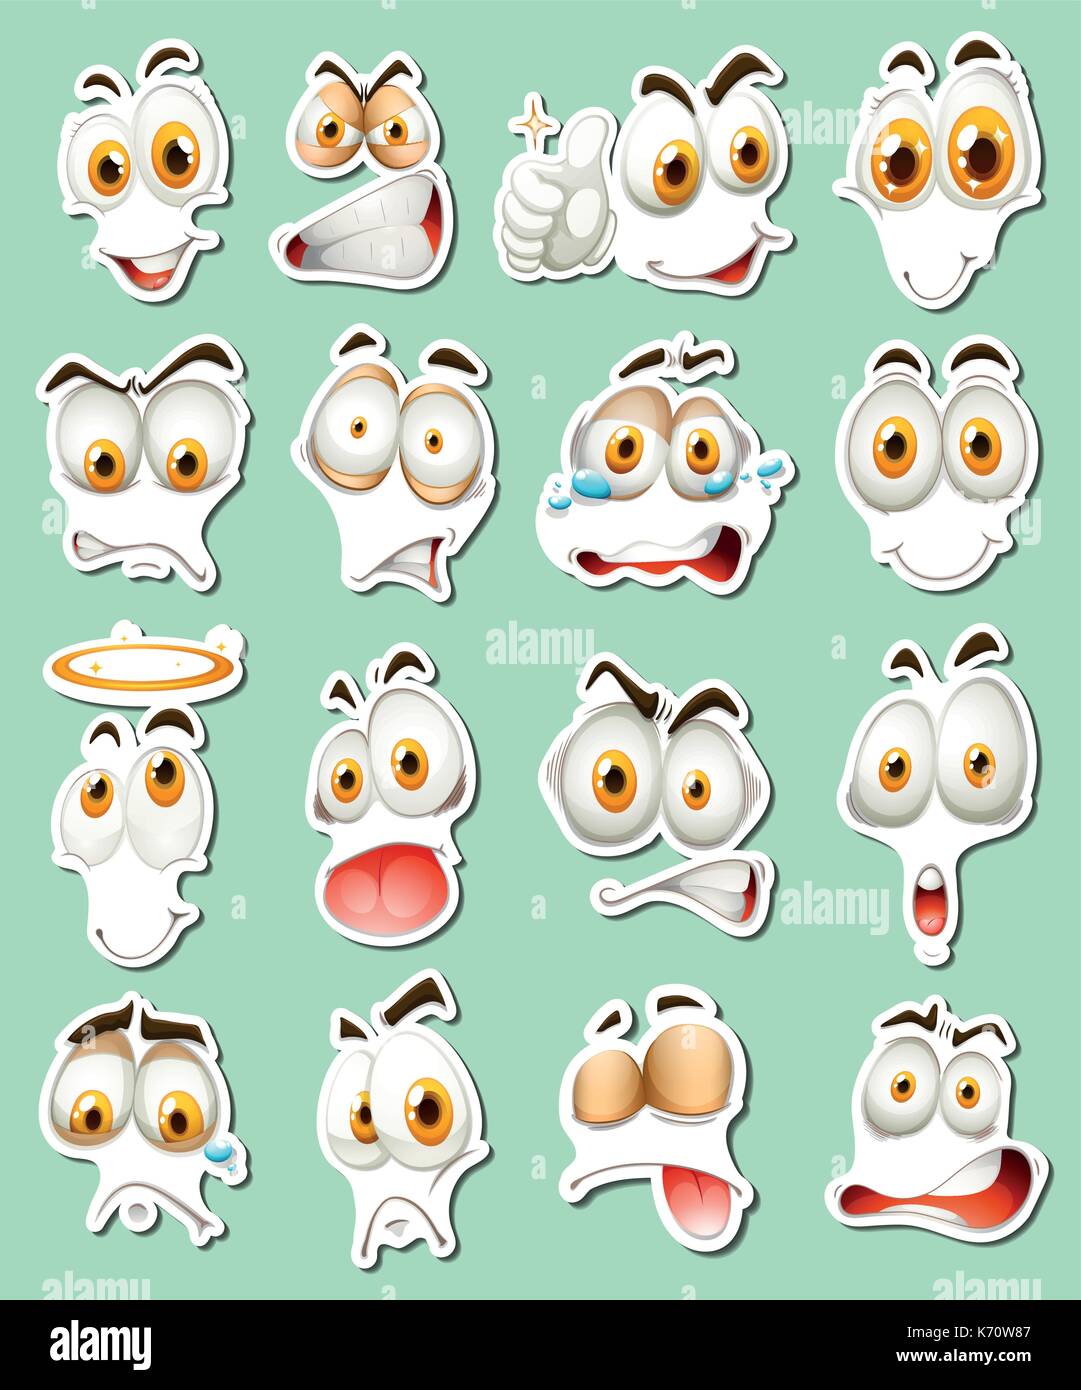 Sticker design for facial expressions illustration Stock Vector